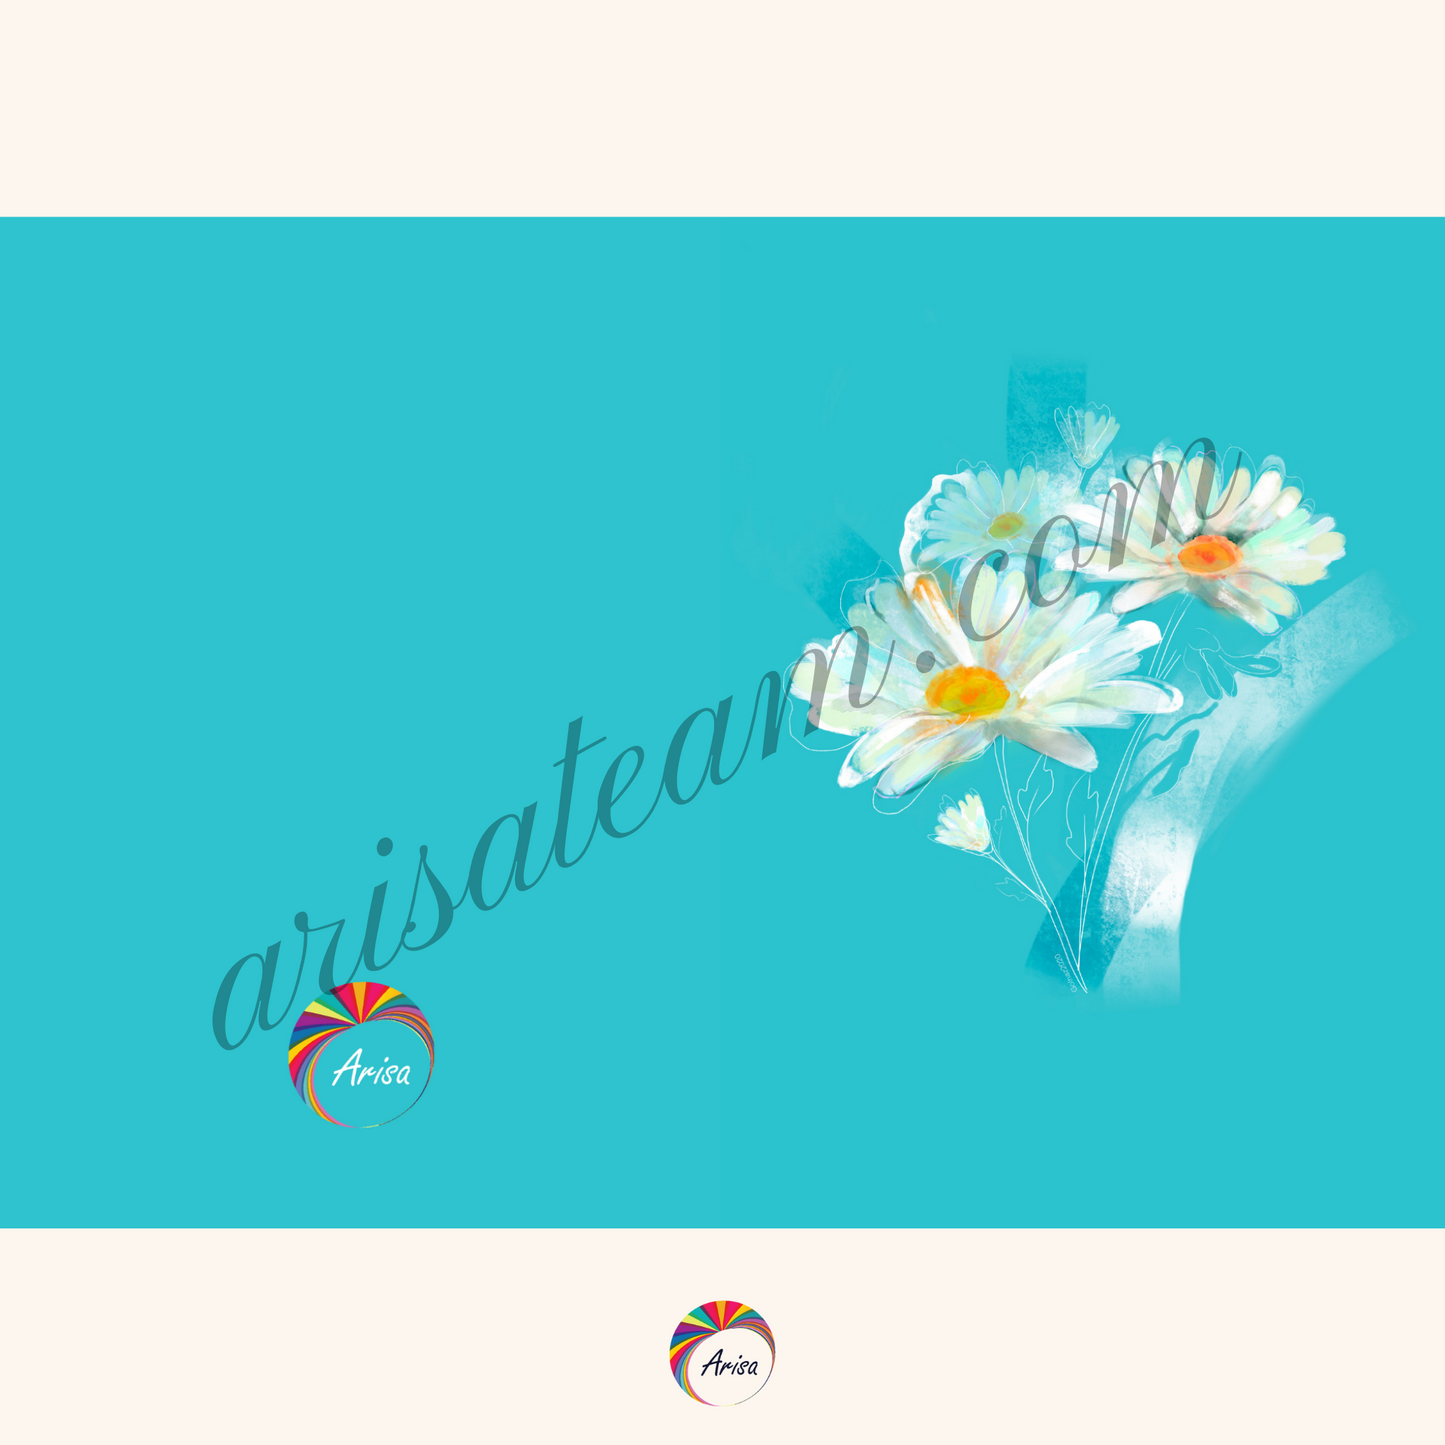 "DAISY" Greeting Card by ArisaTeam in complete form before folding.